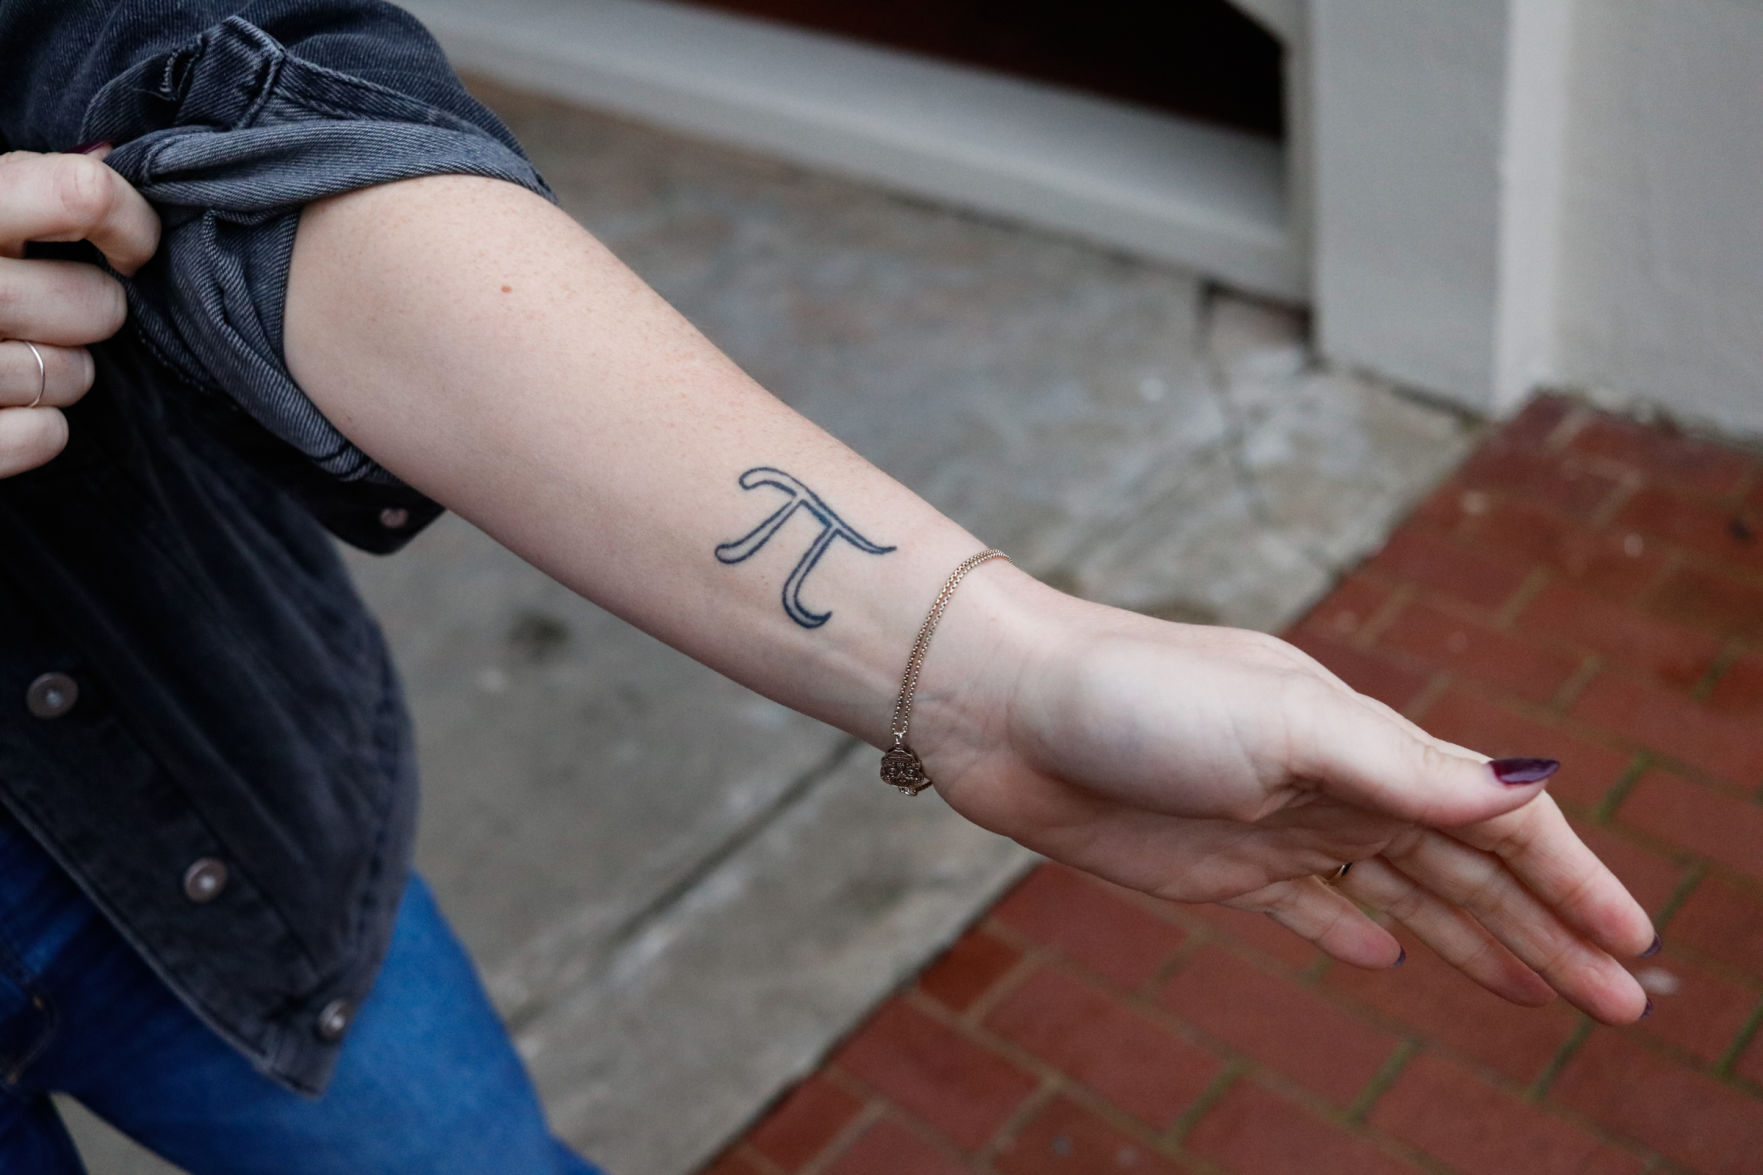 UGA professors weigh in on the changing stigma around tattoos in professional settings